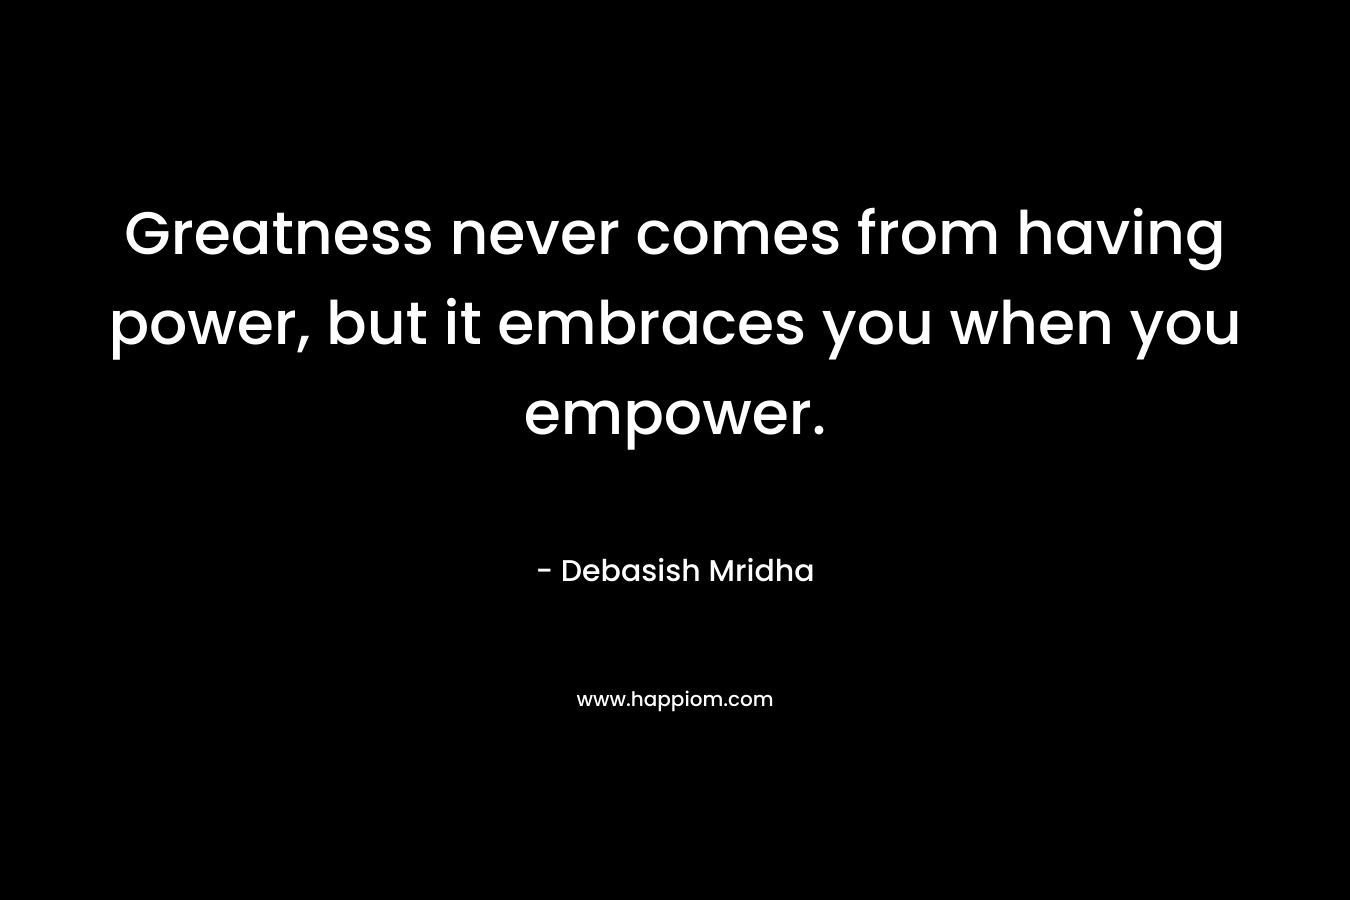 Greatness never comes from having power, but it embraces you when you empower.